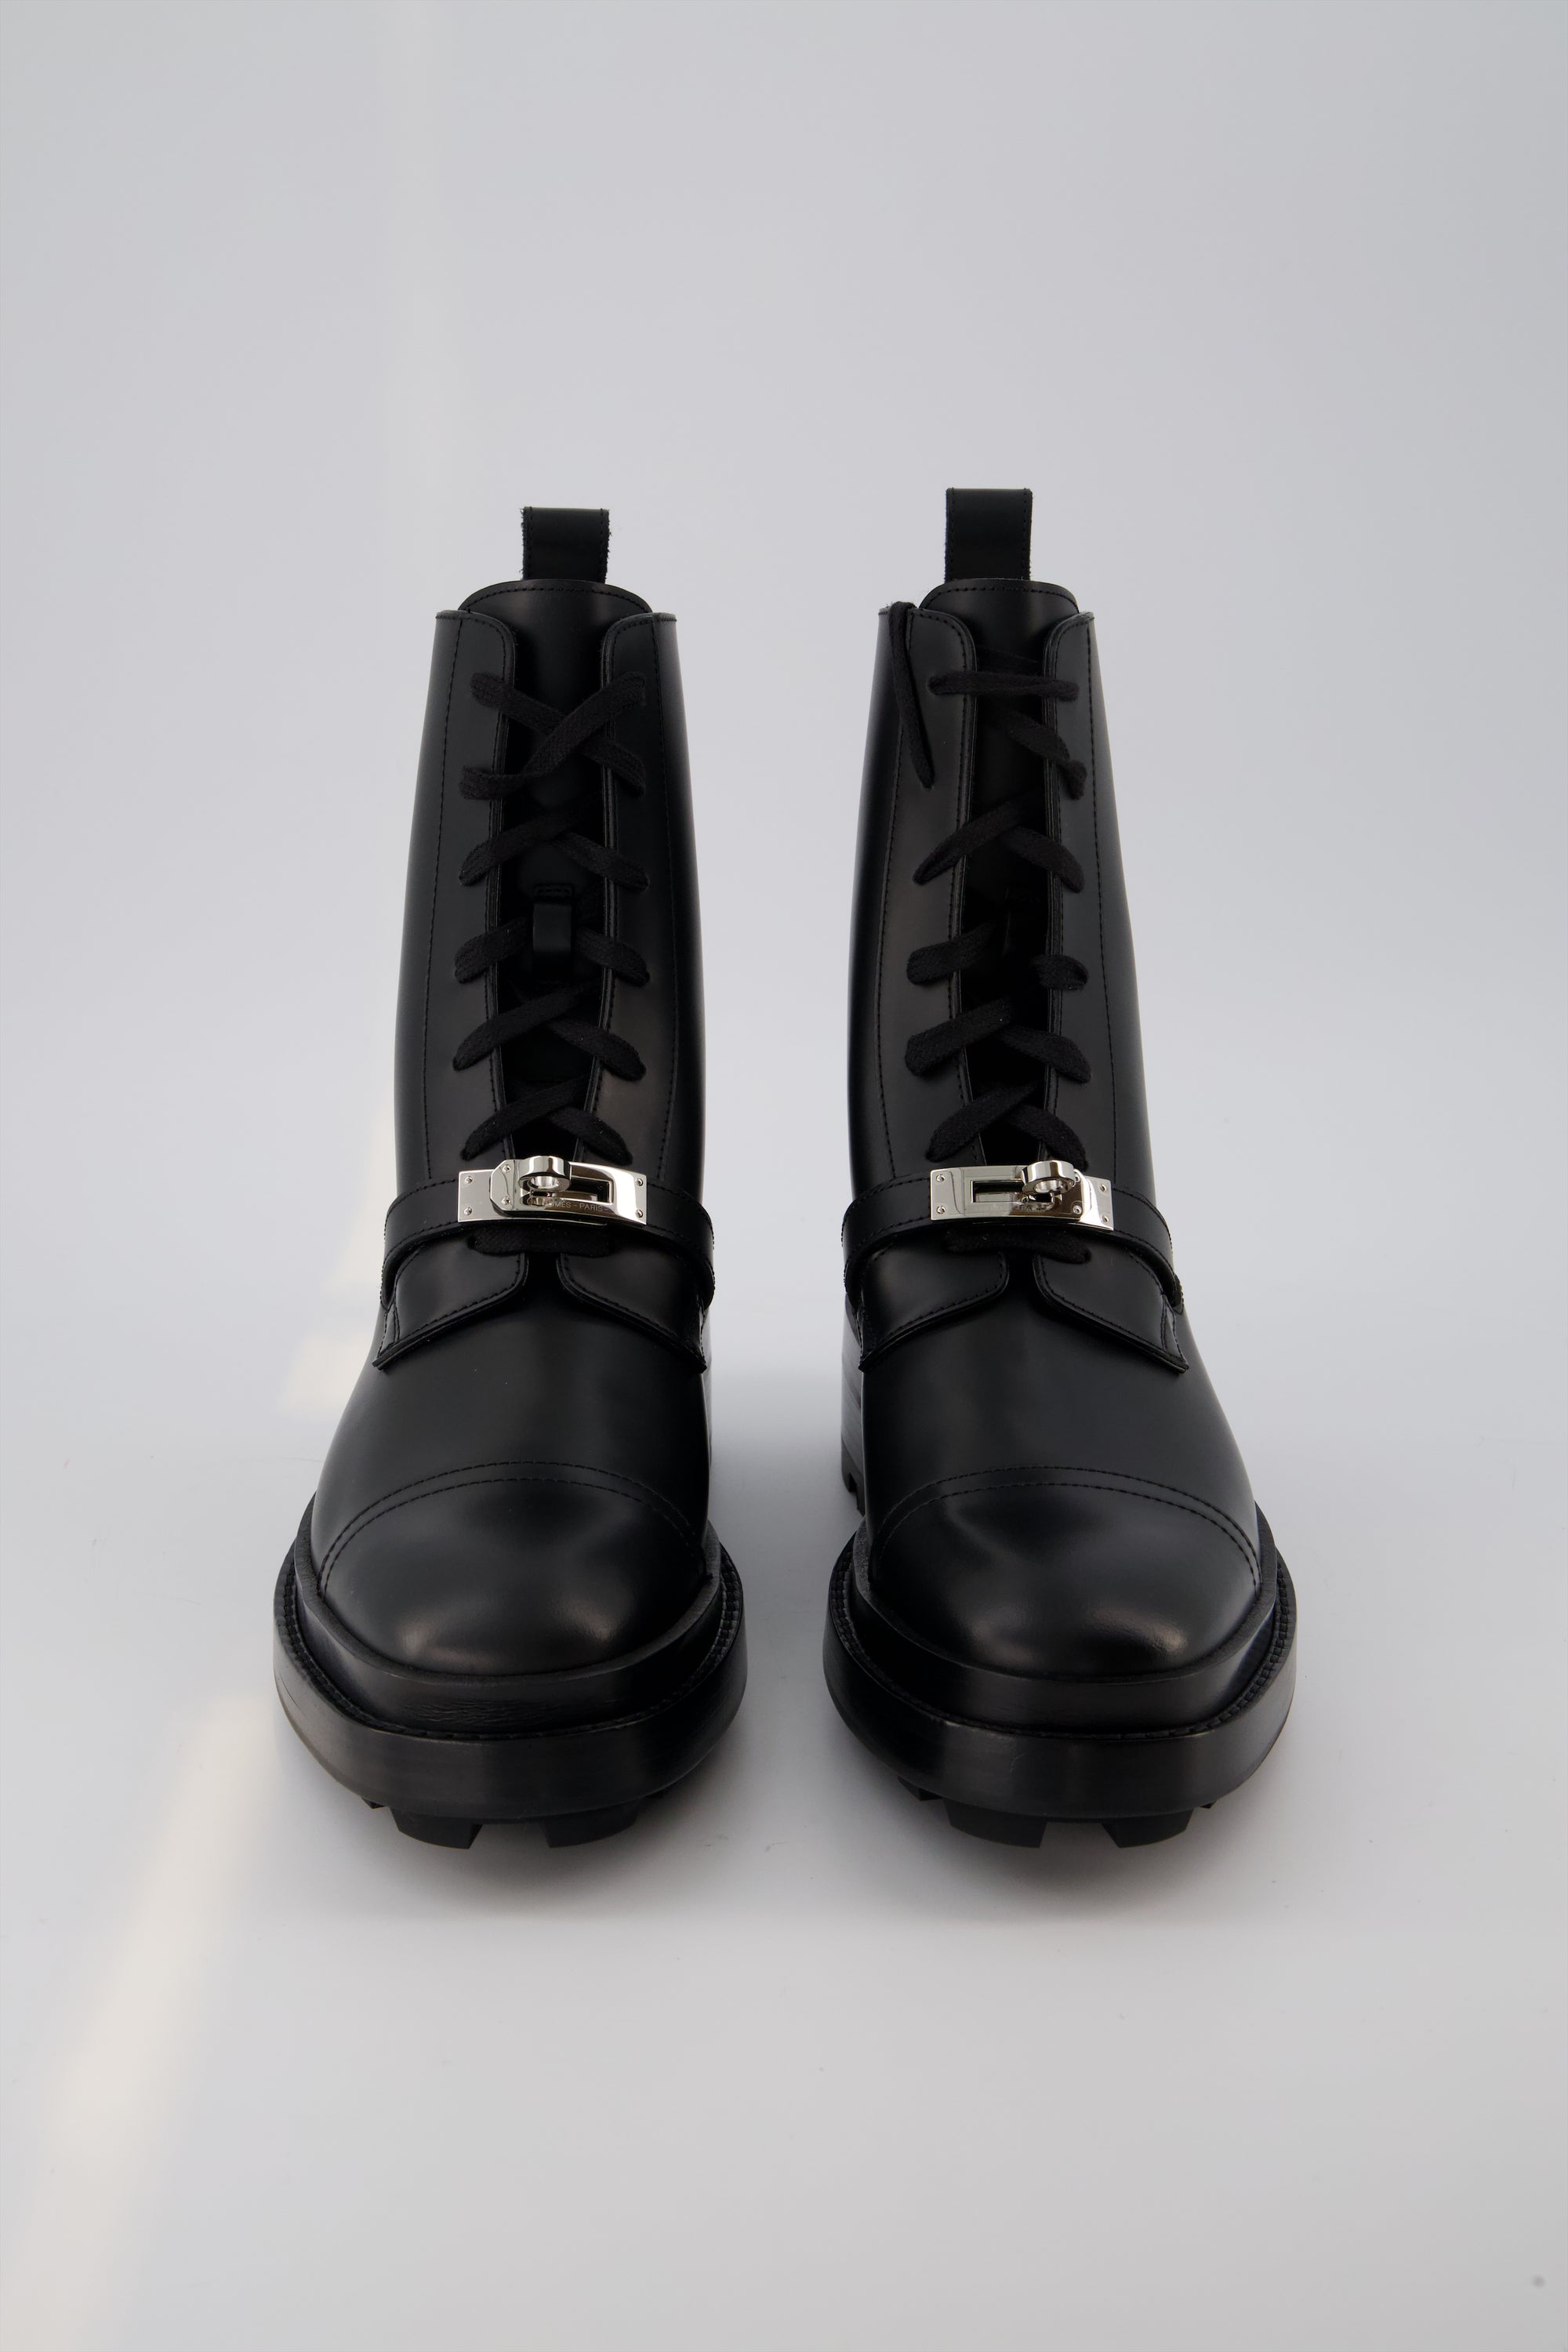 HERMES Funk Ankle Boot Kelly Buckle 41 Size Black (Noir). Ankle boot in glazed calfskin with functional palladium-plated Kelly buckle and notched sole. For a feminine yet masculine look.